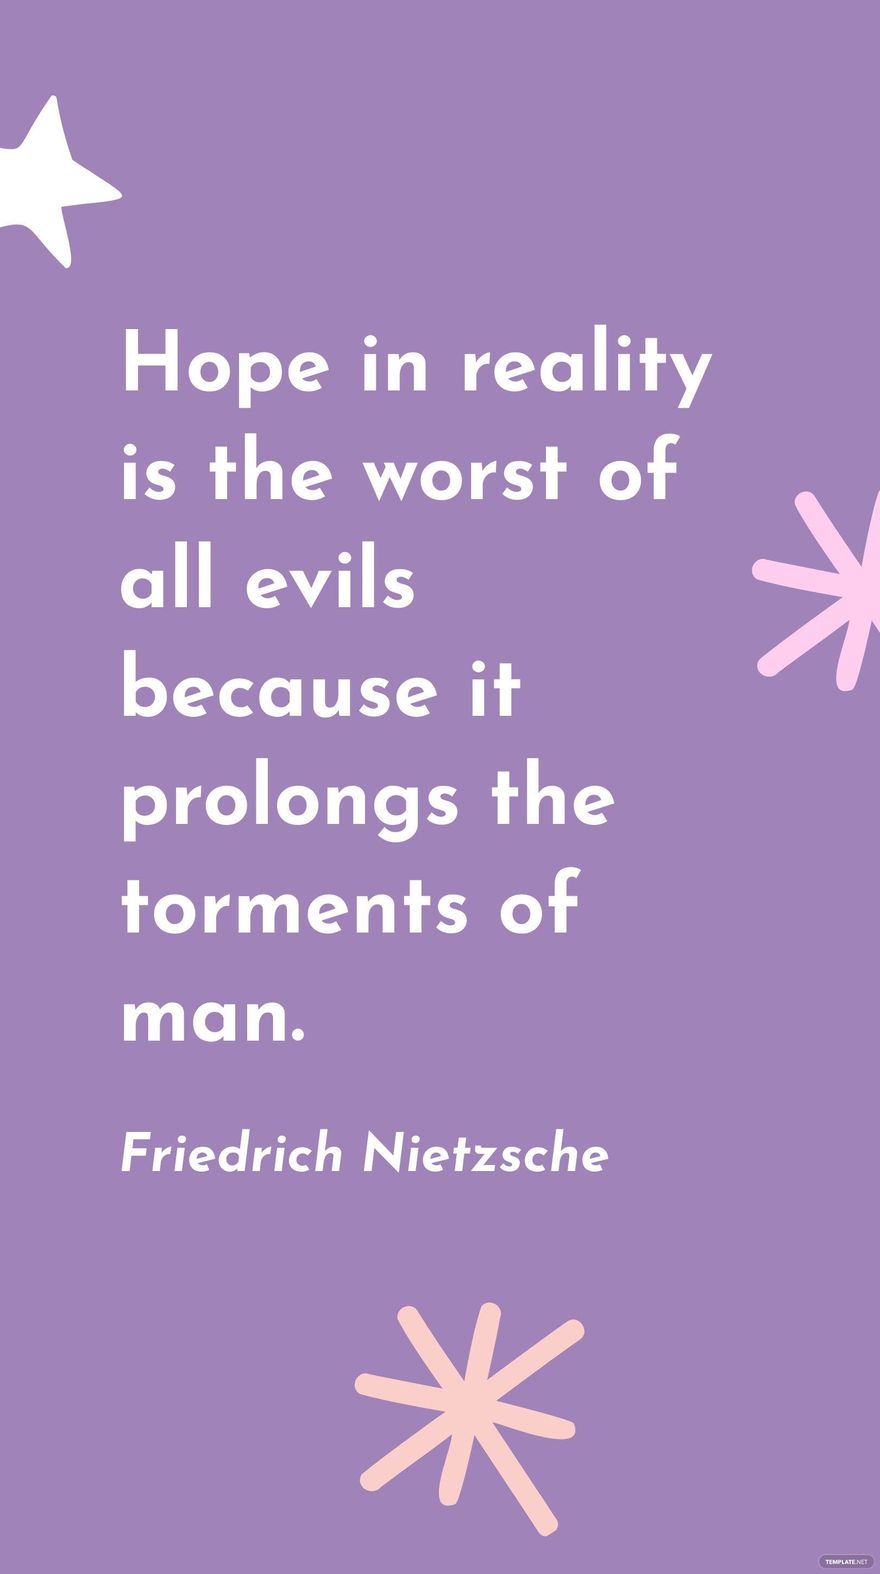 Free Friedrich Nietzsche - Hope in reality is the worst of all evils because it prolongs the torments of man. in JPG